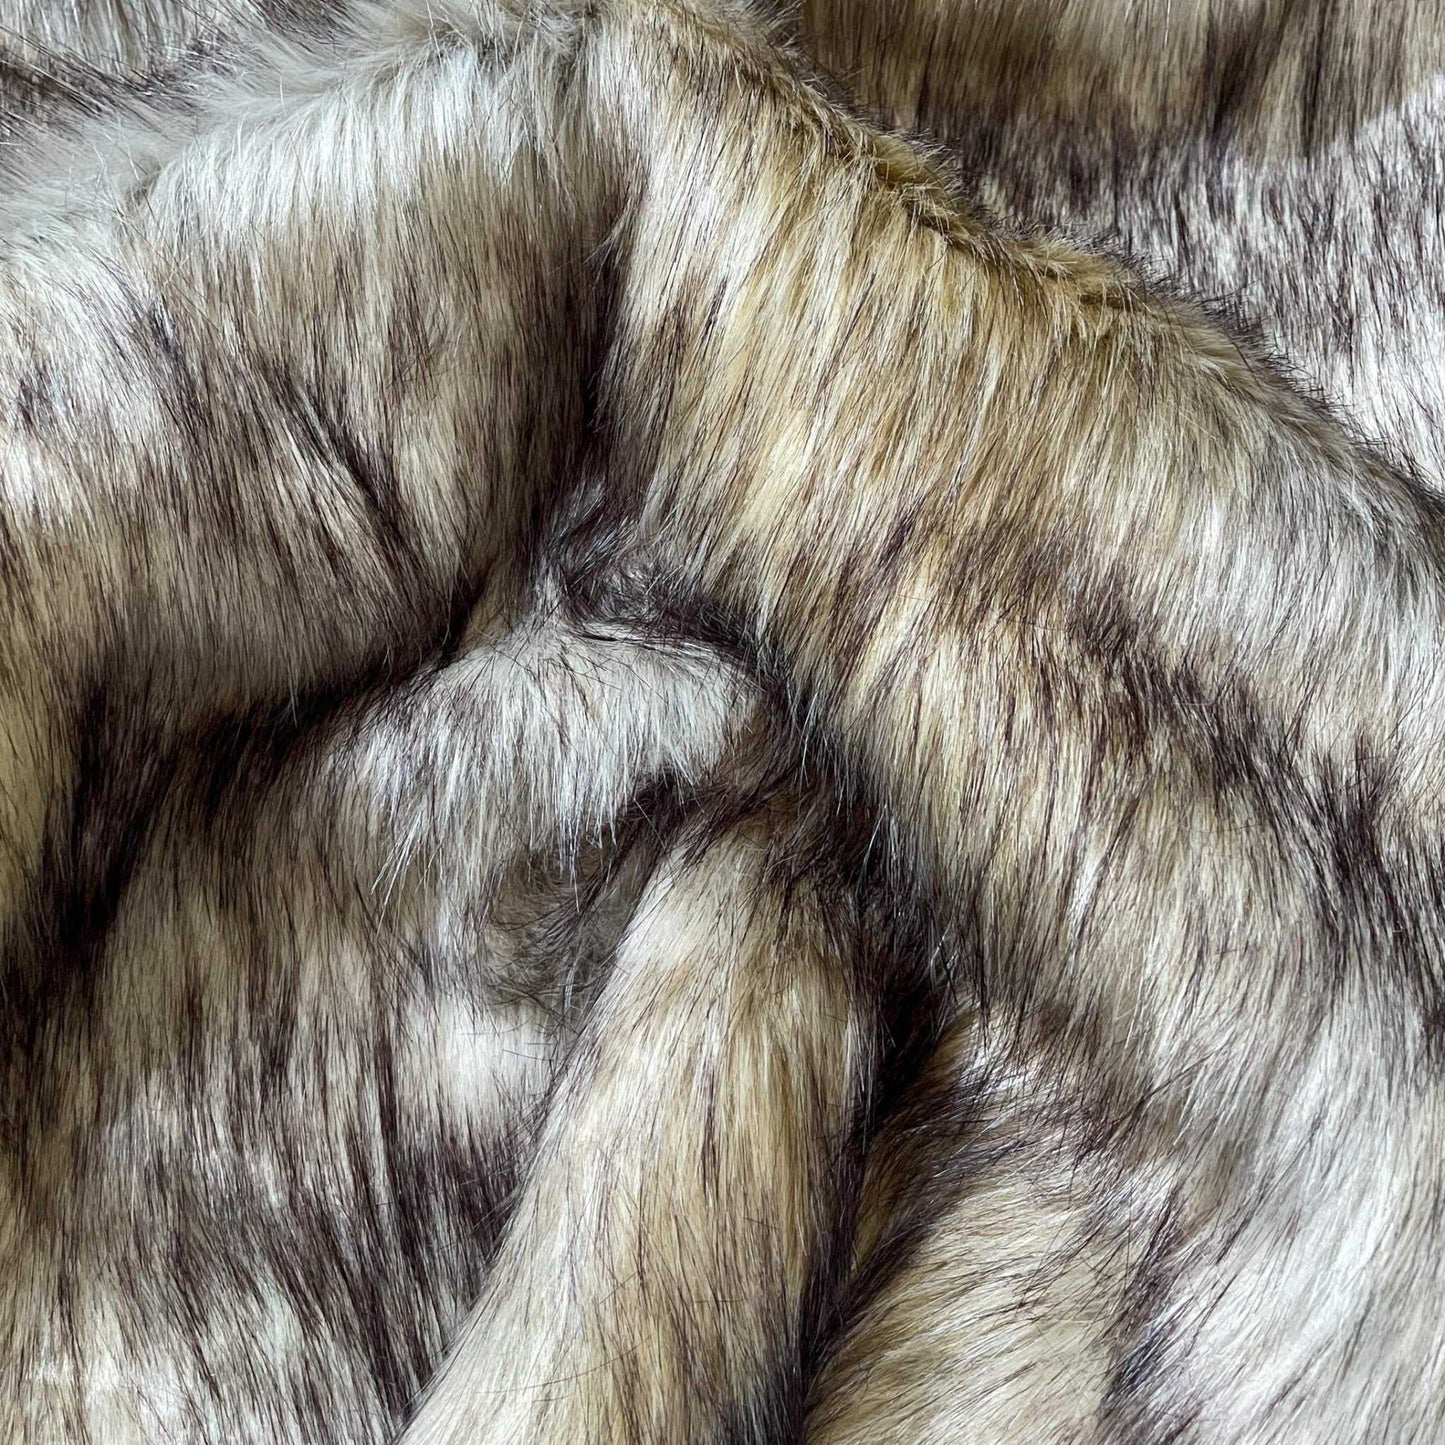 Husky/Honey Faux Fur Fabric by the Yard or Meter | Grey and Tan Pompom, Arts & Crafts, Decor, Costume Faux Fur Fabric 3 $ Buttons & Beans Co.